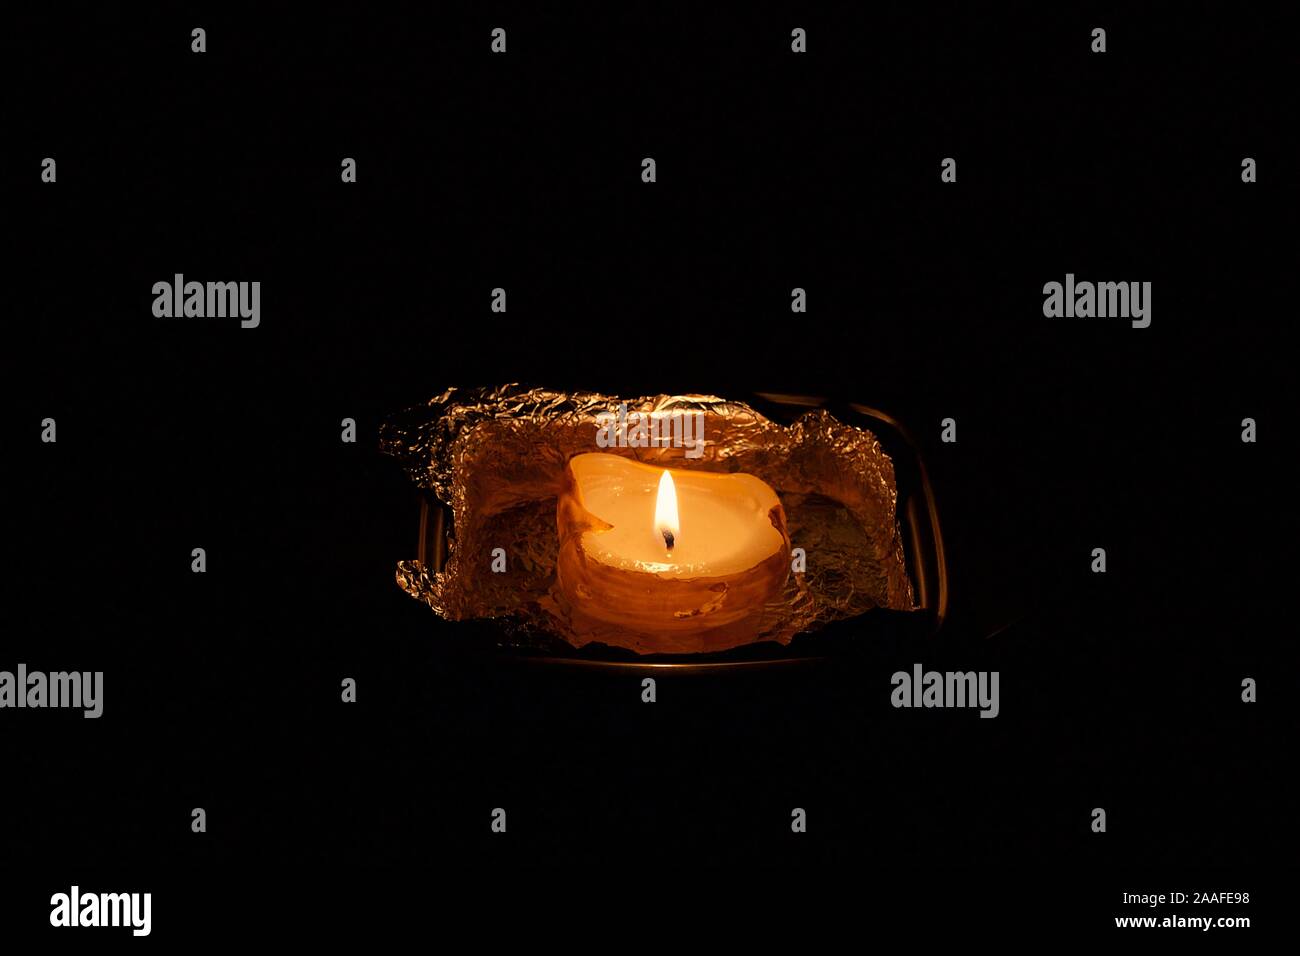 Lit one candle at home darkness after midnight at night into aluminum foil isolated in black background Stock Photo